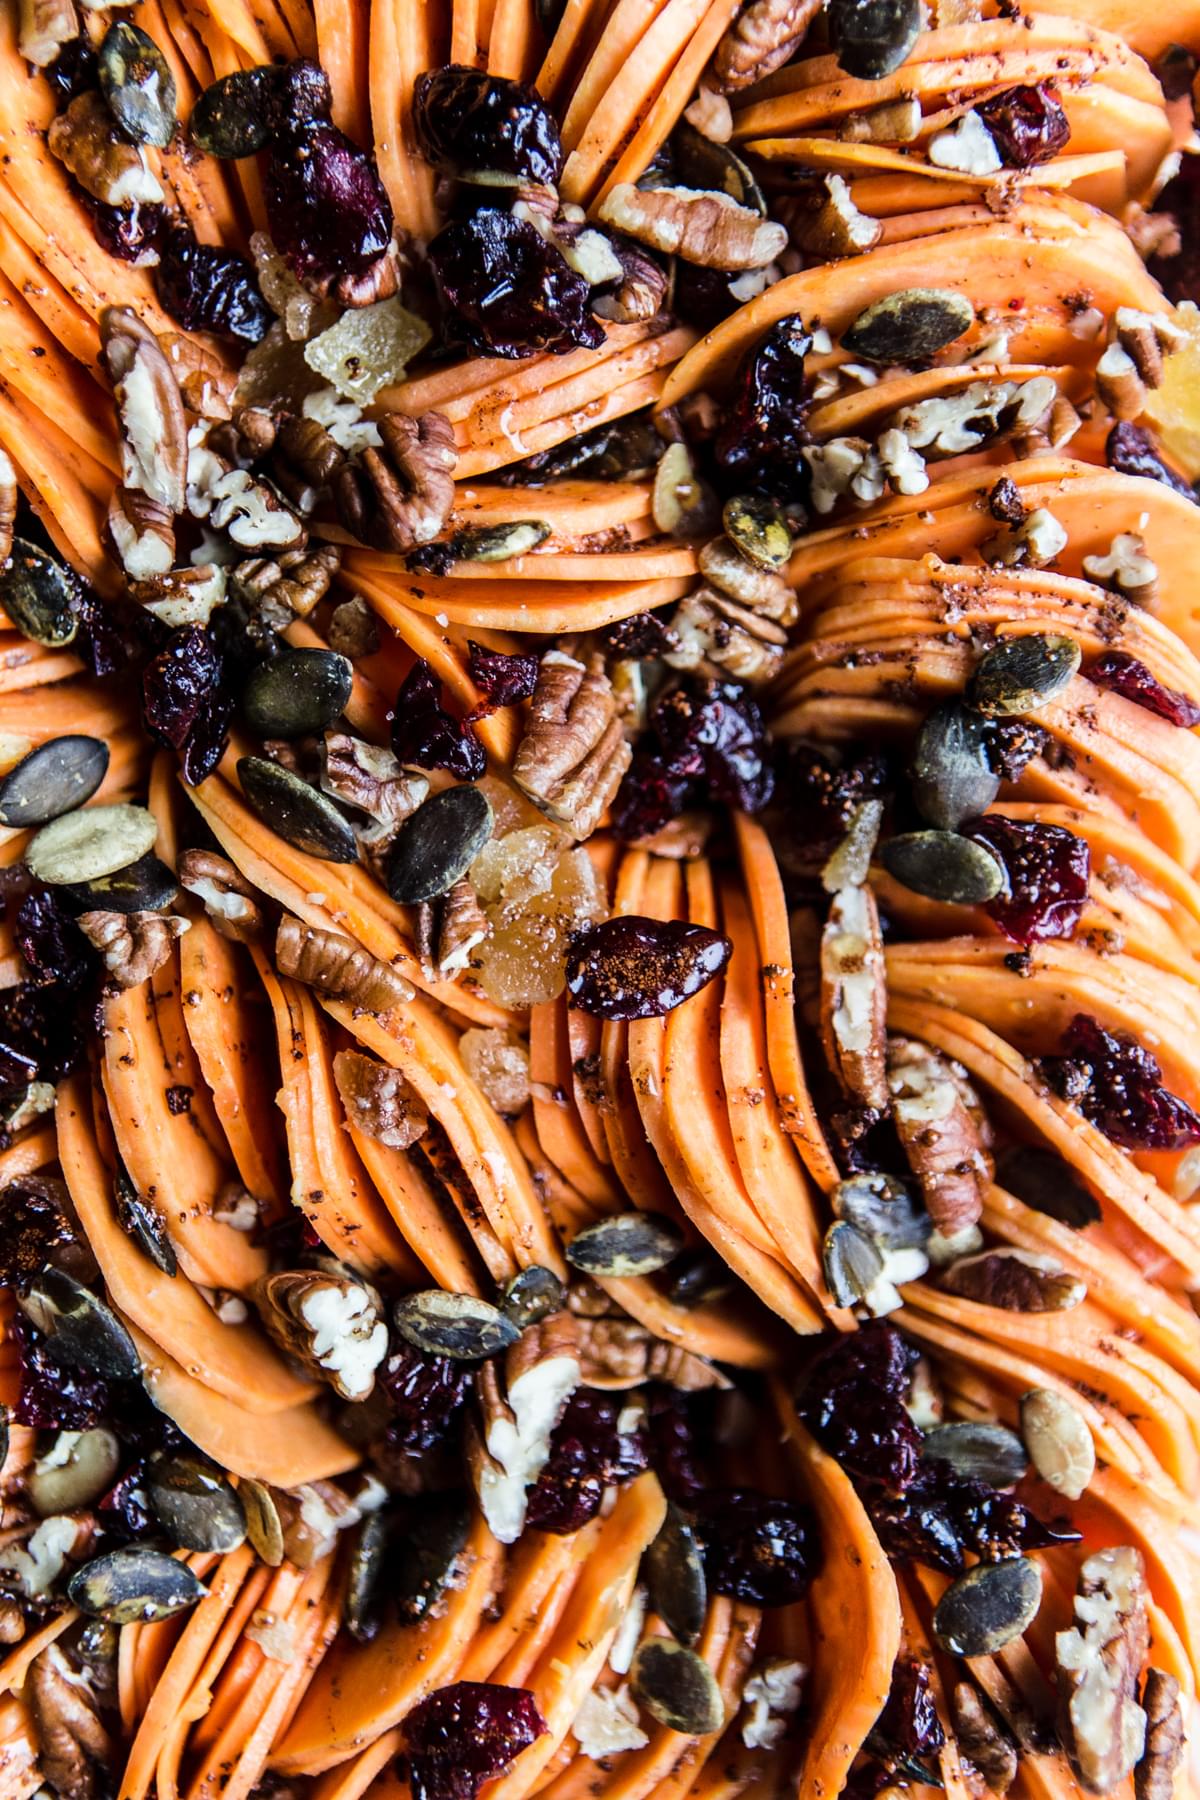 Healthy Sweet Potato Casserole in a baking dish made with cranberries, maple syrup, pecans and pumpkin seeds